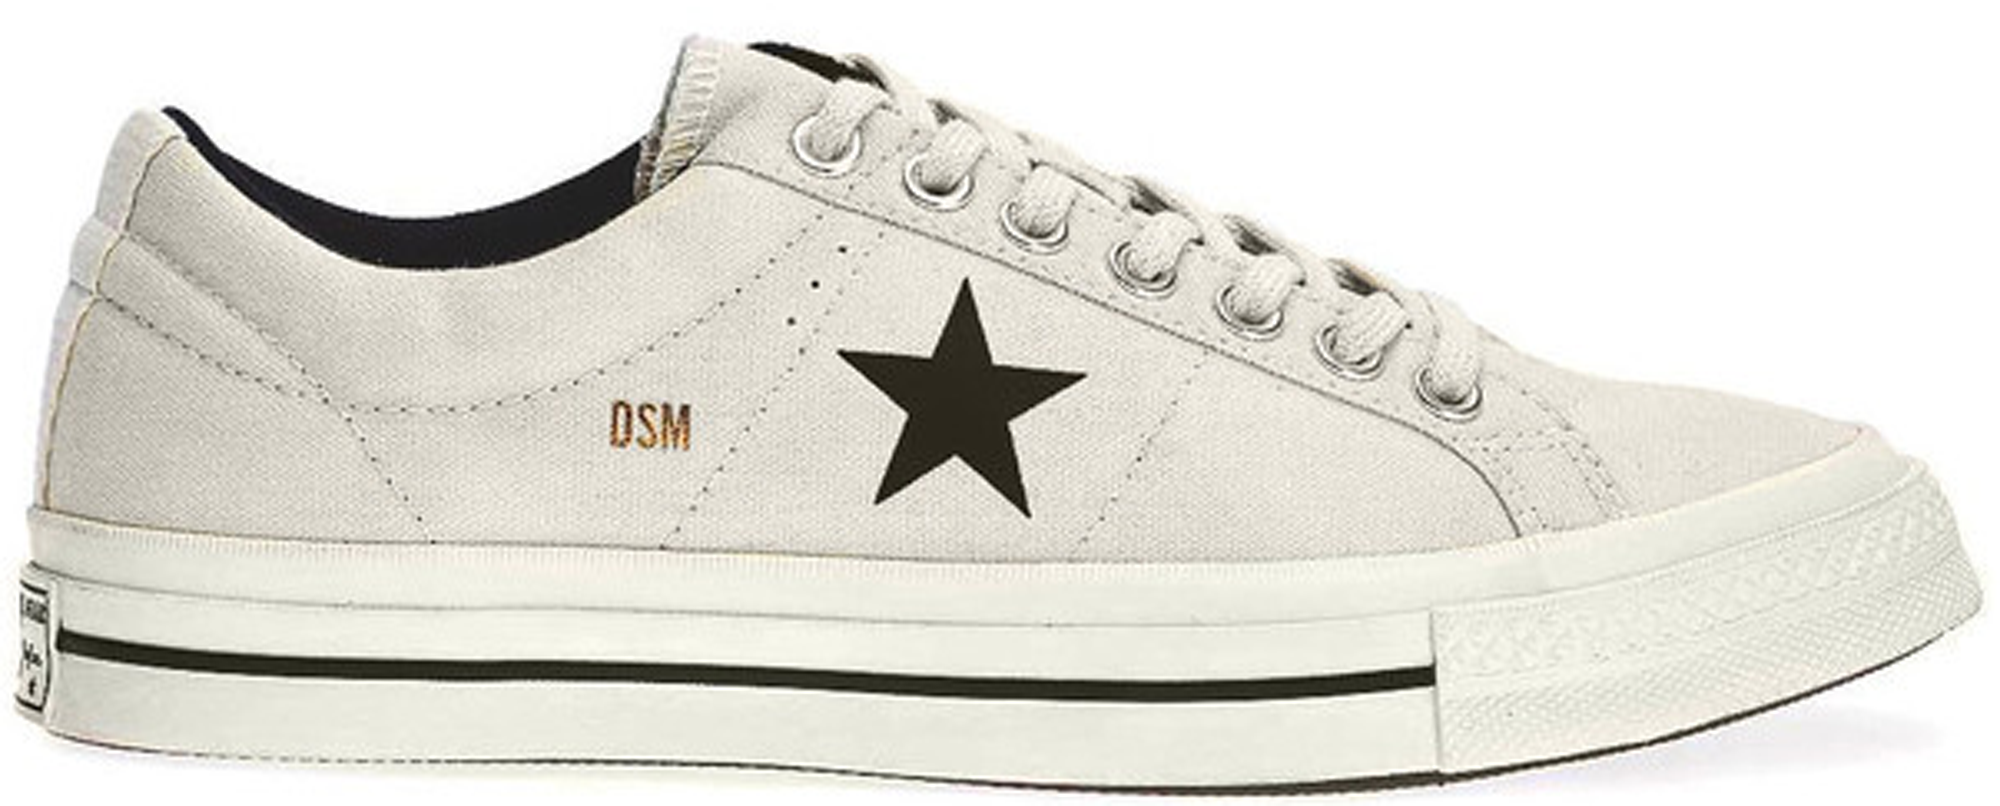 Converse One Star Canvas Ox Dover 